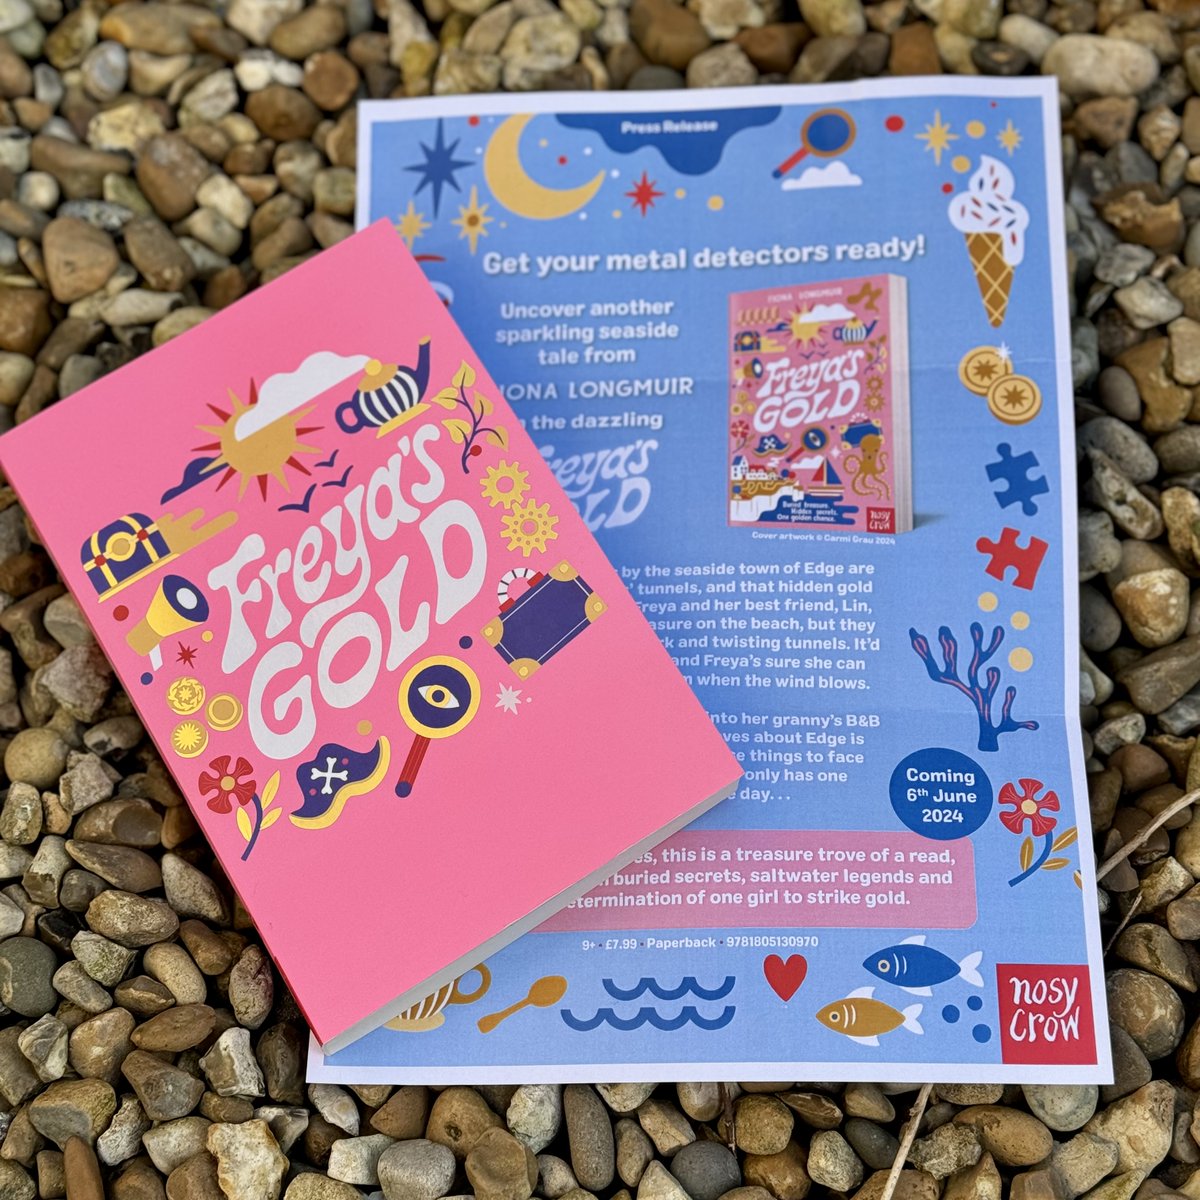 This week's book is #FreyasGold by @fionalongmuir. Great setting, easy to read, and some inventive treasure hunting traps which I LOVED. Freya is great – clever, awkward, scared but brave – and she and her friends interact so well I felt I knew them. Gold! 👑 (thx @NosyCrow!)